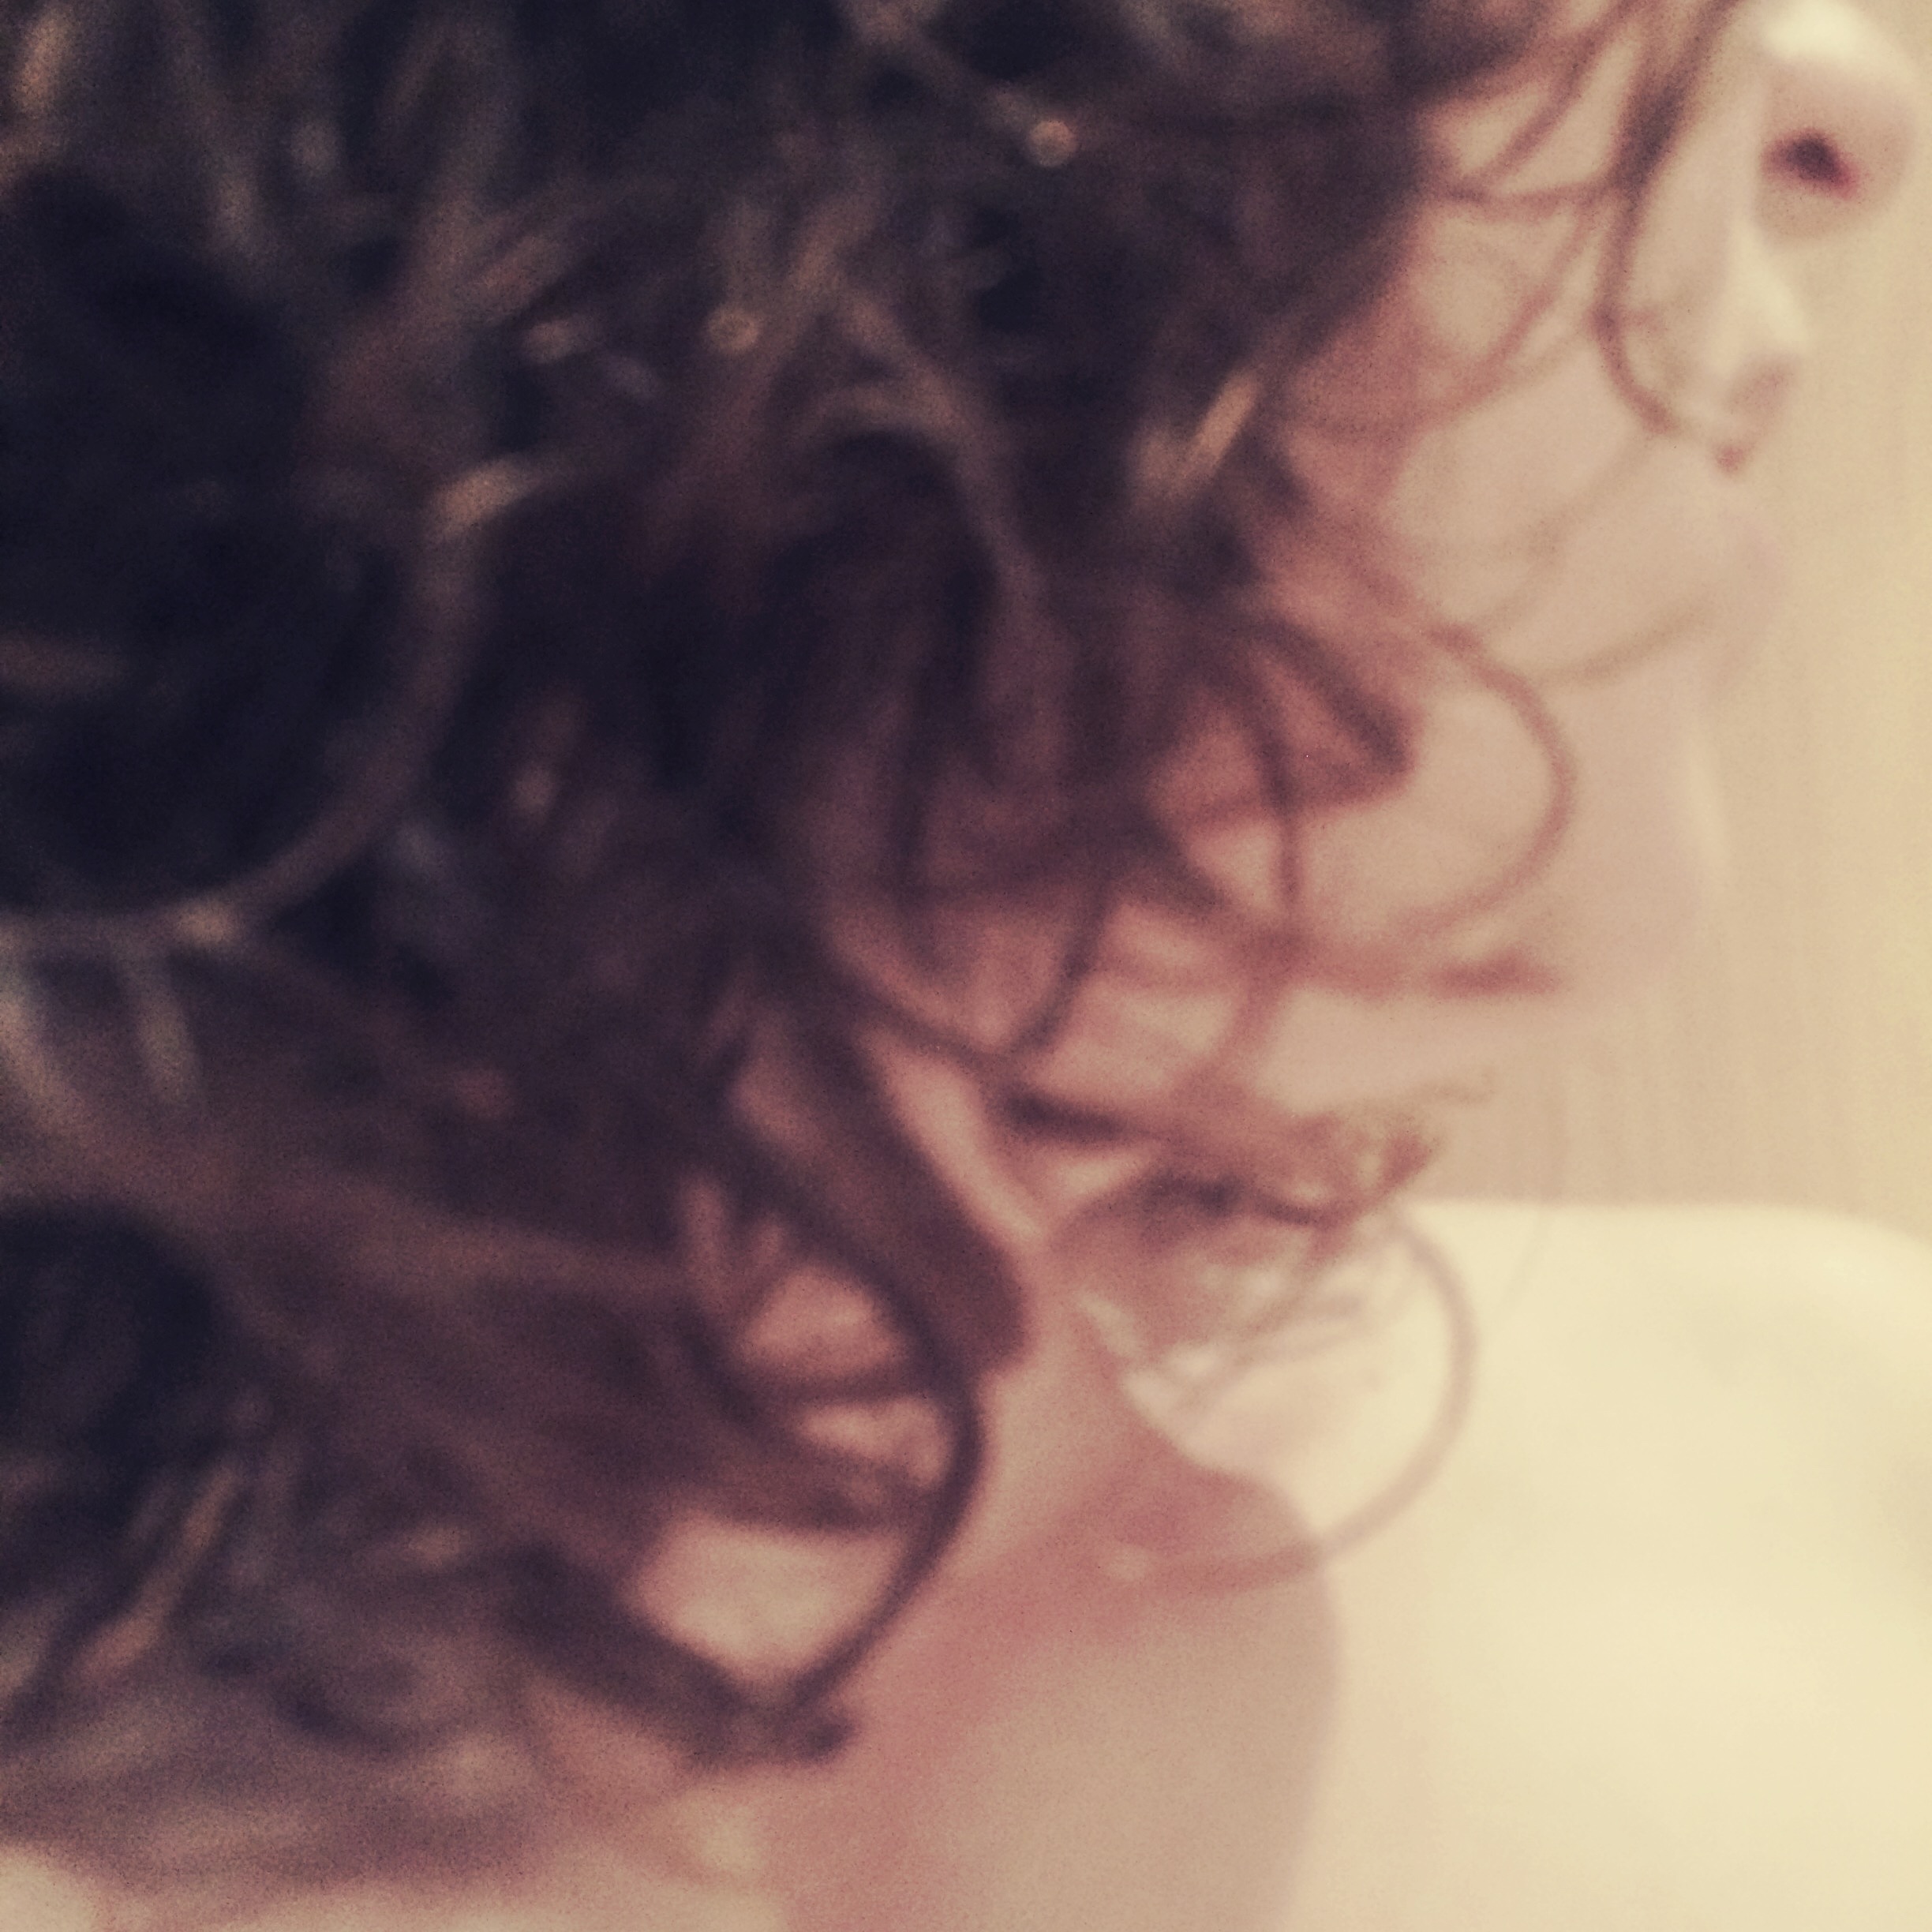 My Twitter avatar - a photo looking over my shoulder with my face obscured by curly brown hair